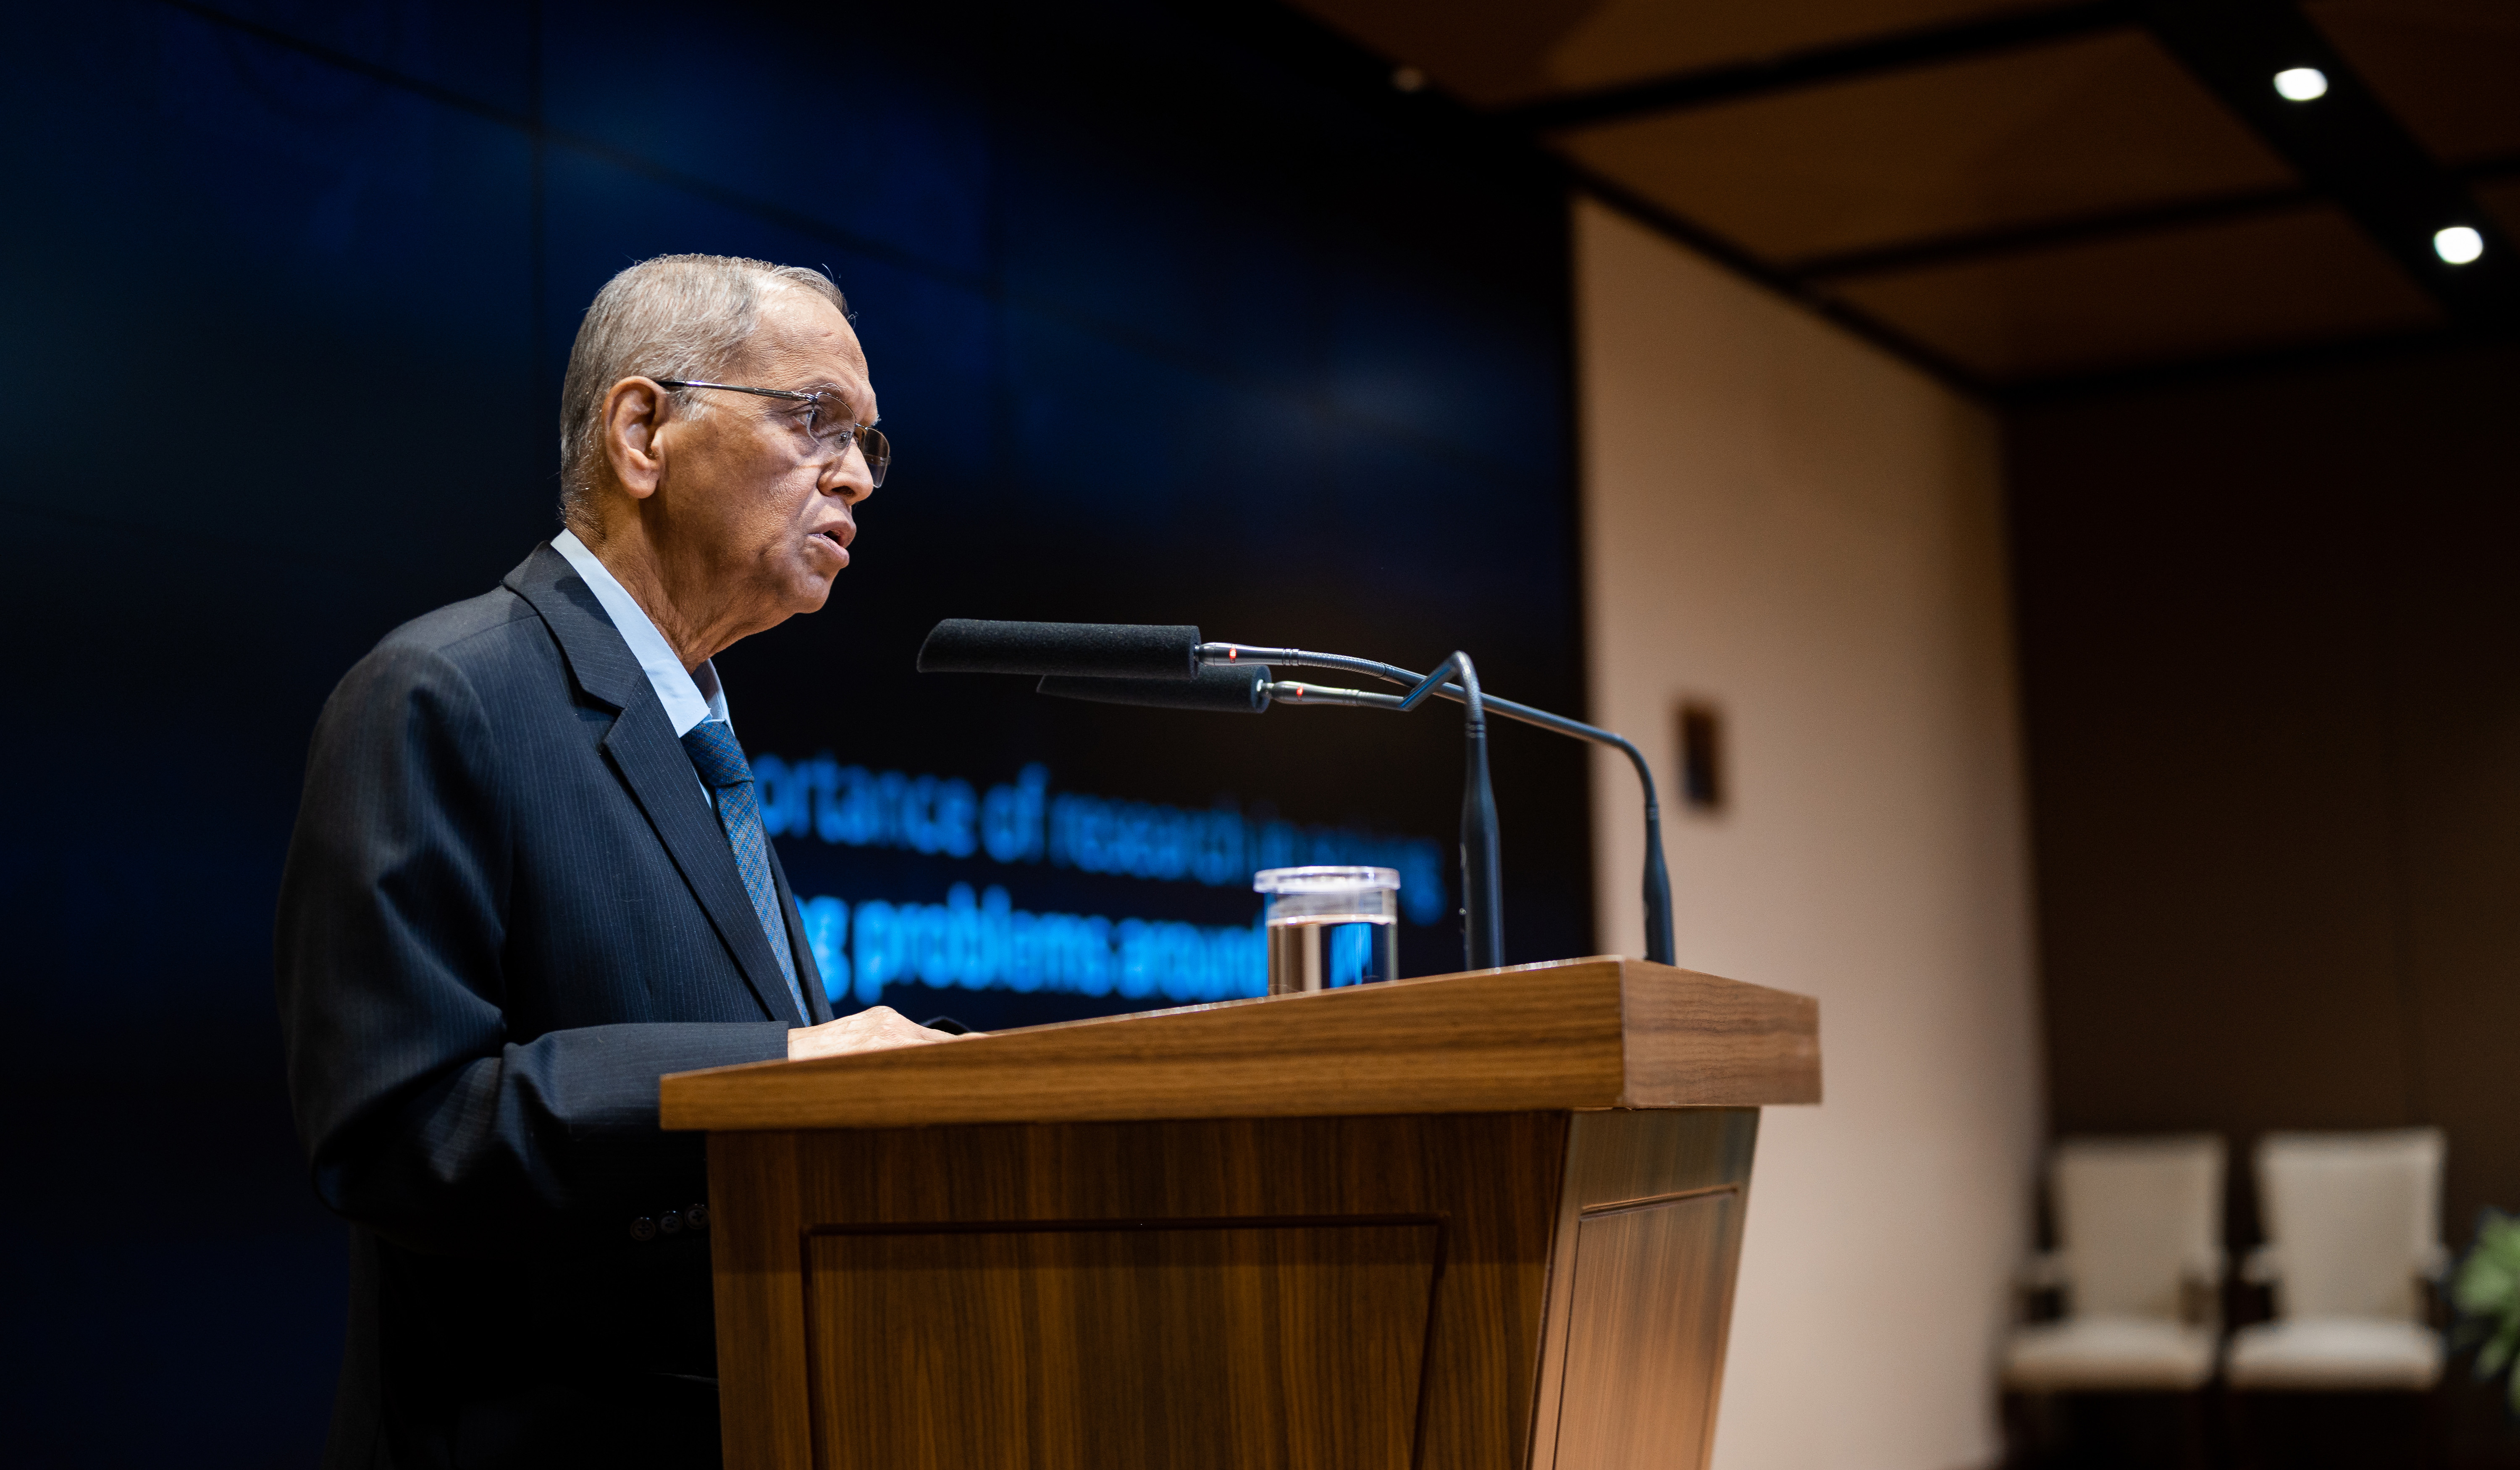 Trustee, Narayana Murthy on the importance of research in solving pressing problems around us